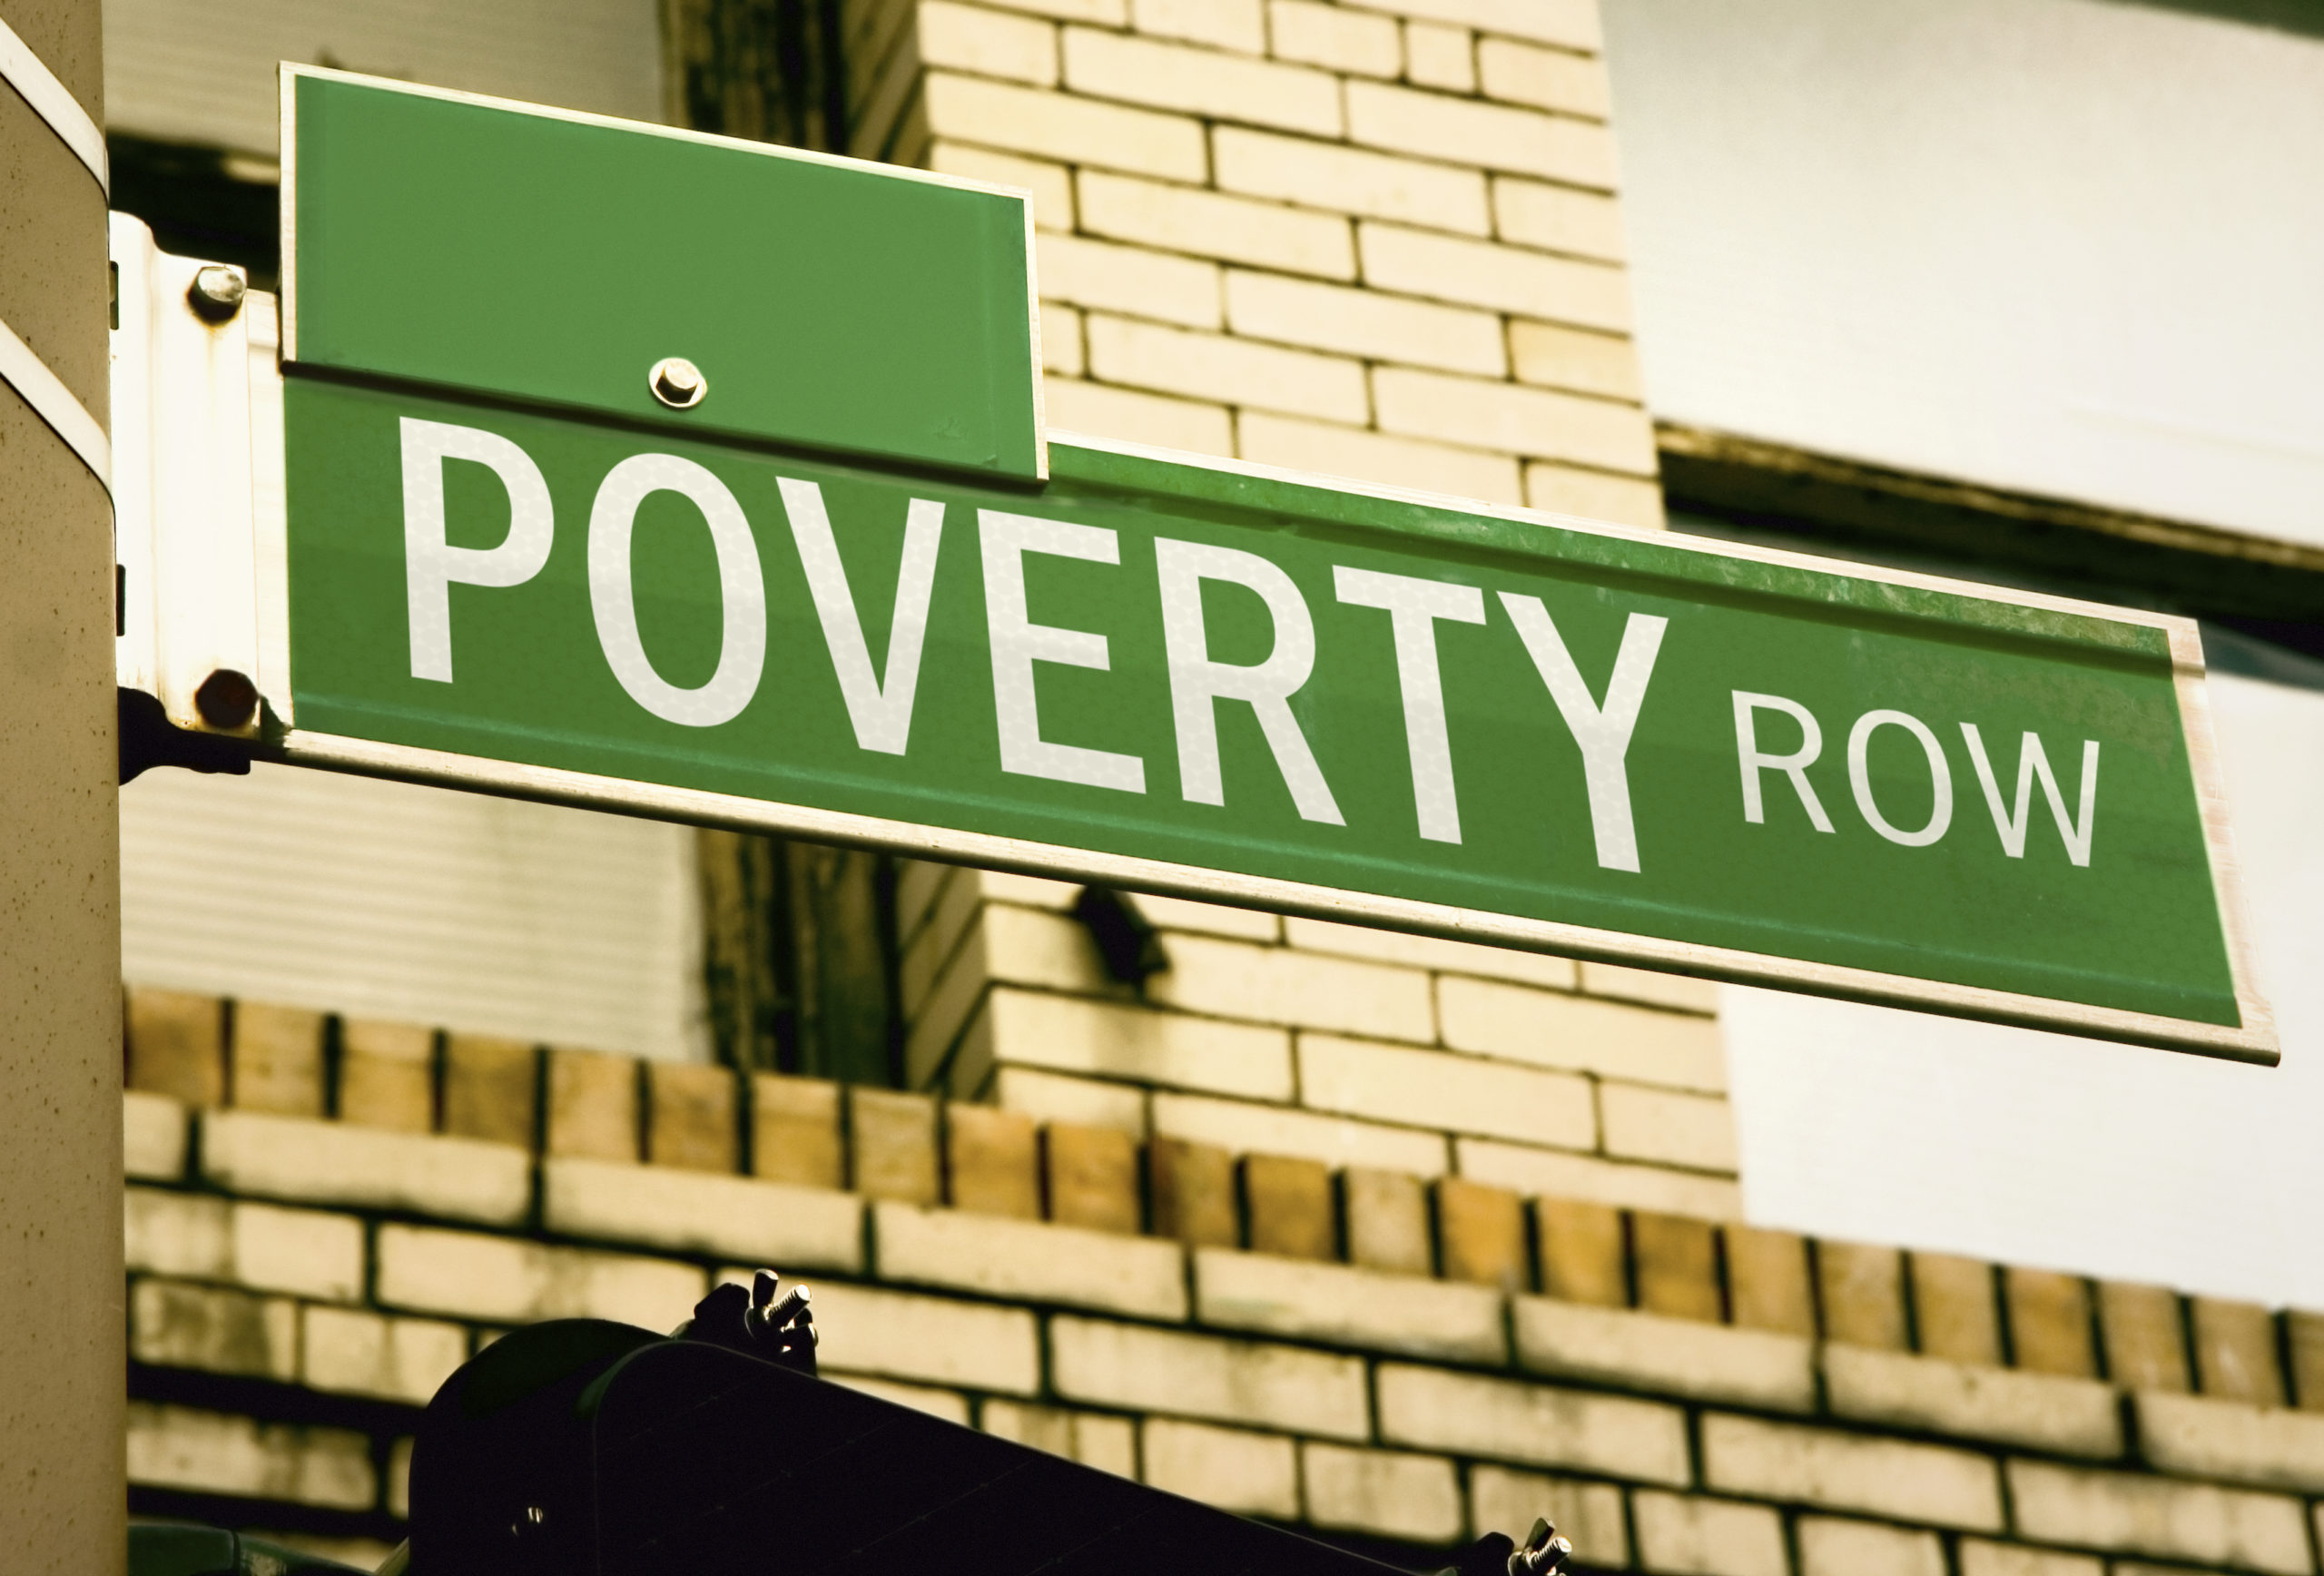 Life at the Edge: Precarity and Economic Insecurity in Illinois and the U.S.